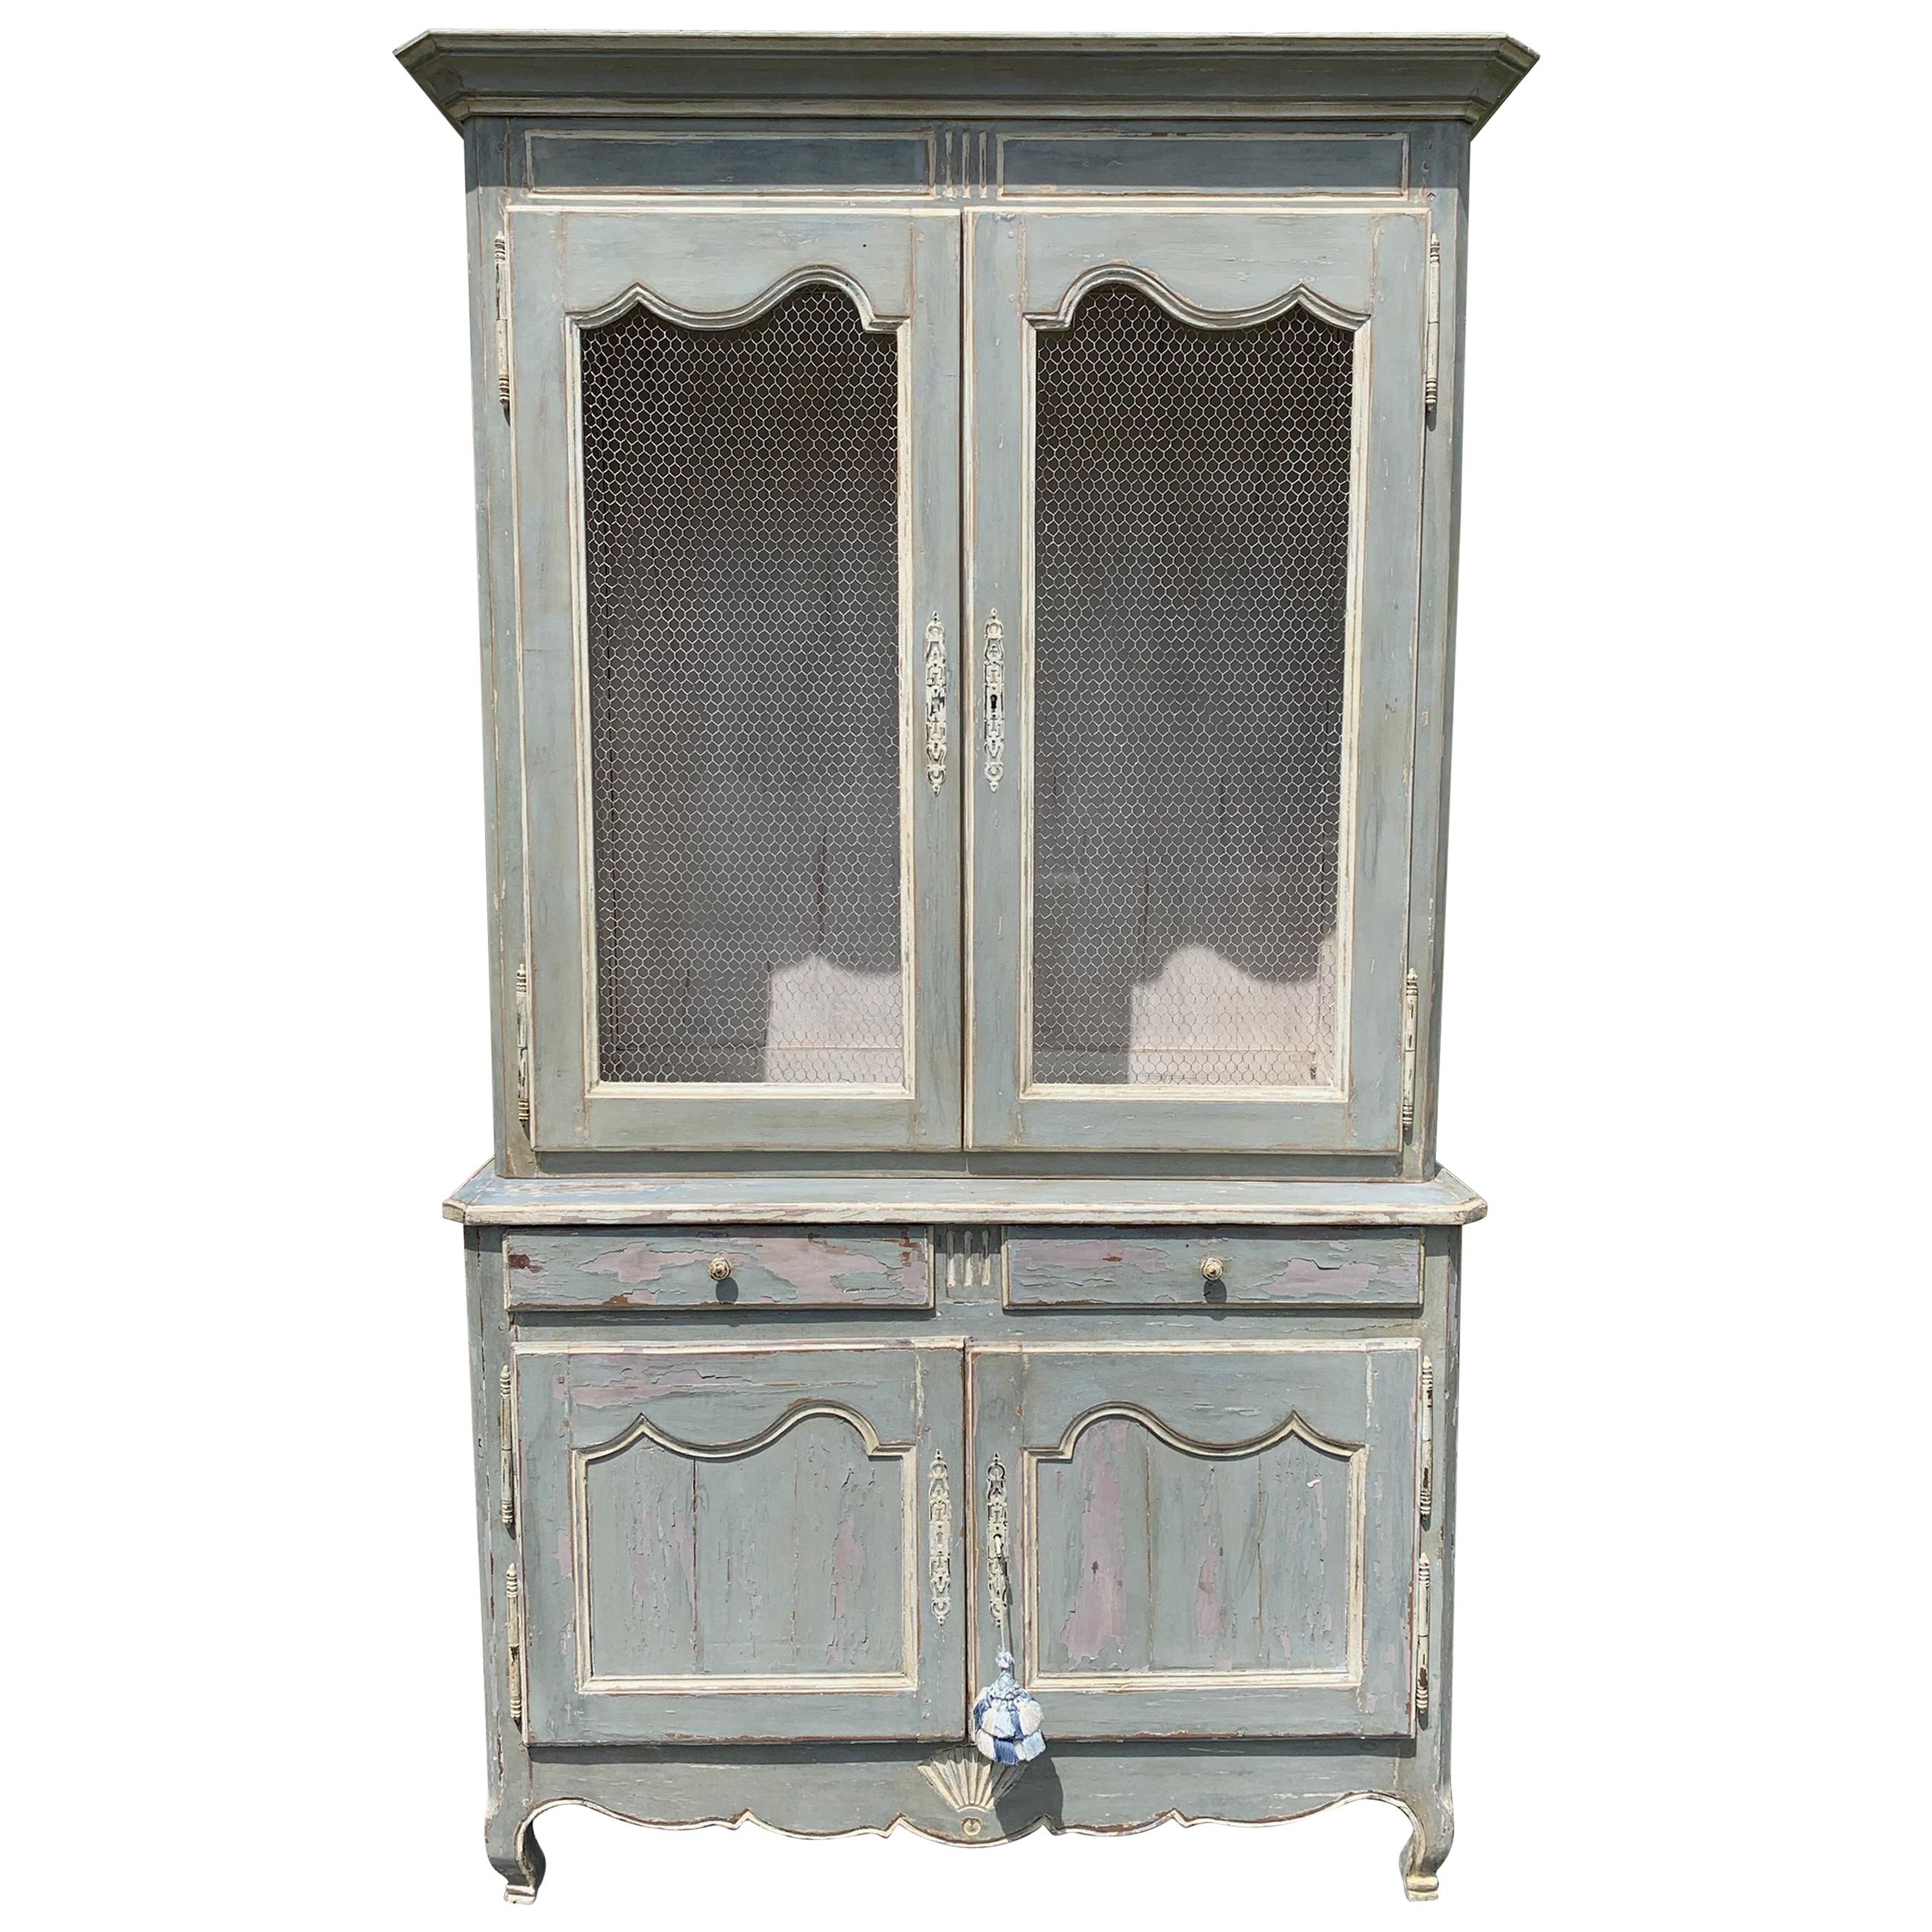 Antique French Provincial Buffet Deux Corps Grillage Cupboard Cabinet